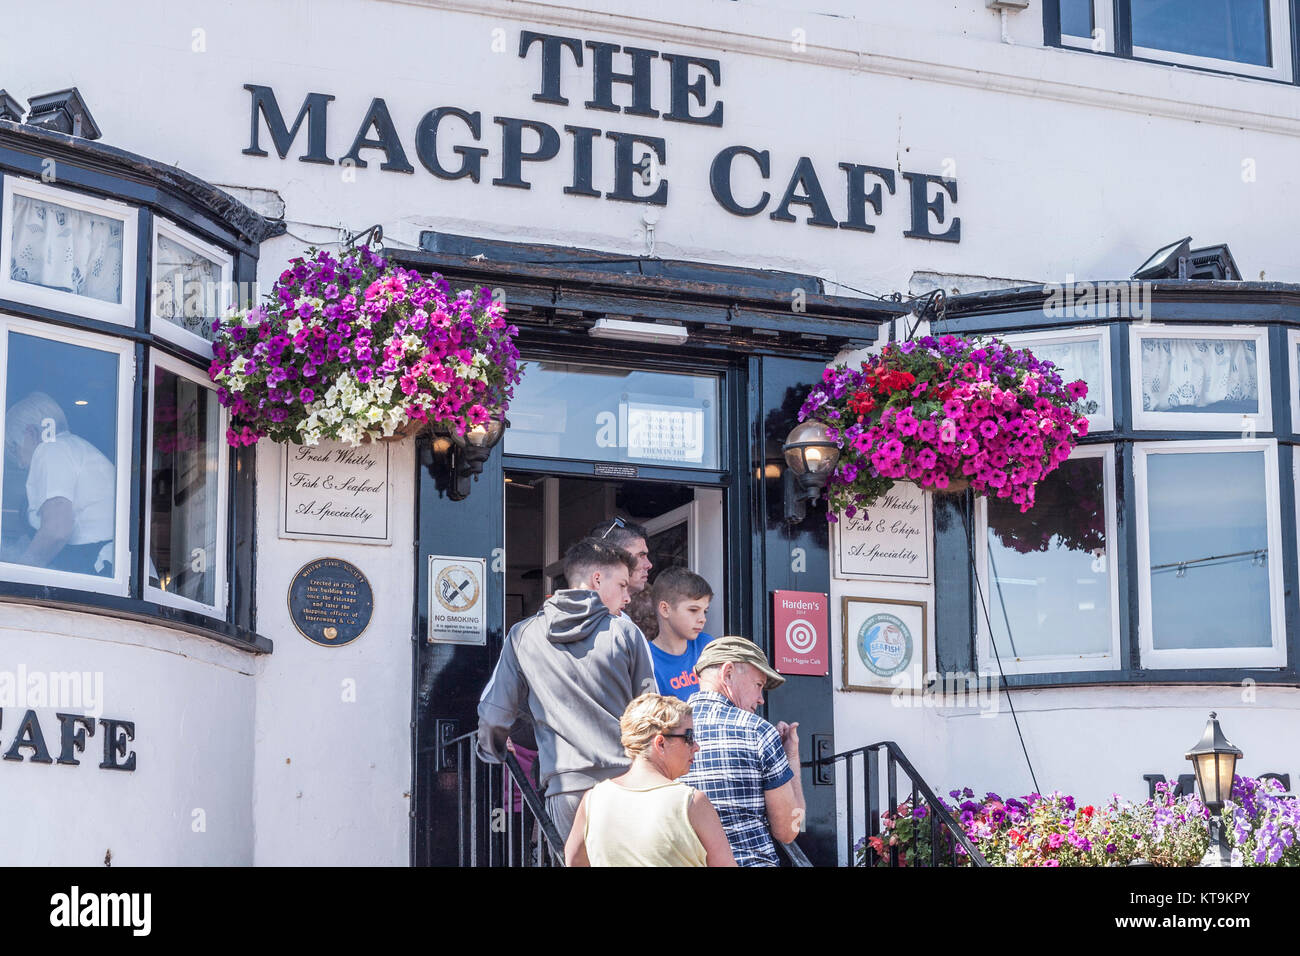 People queuing outside the Magpie Cafe in Whitby, North Yorkshire,England,UK Stock Photo